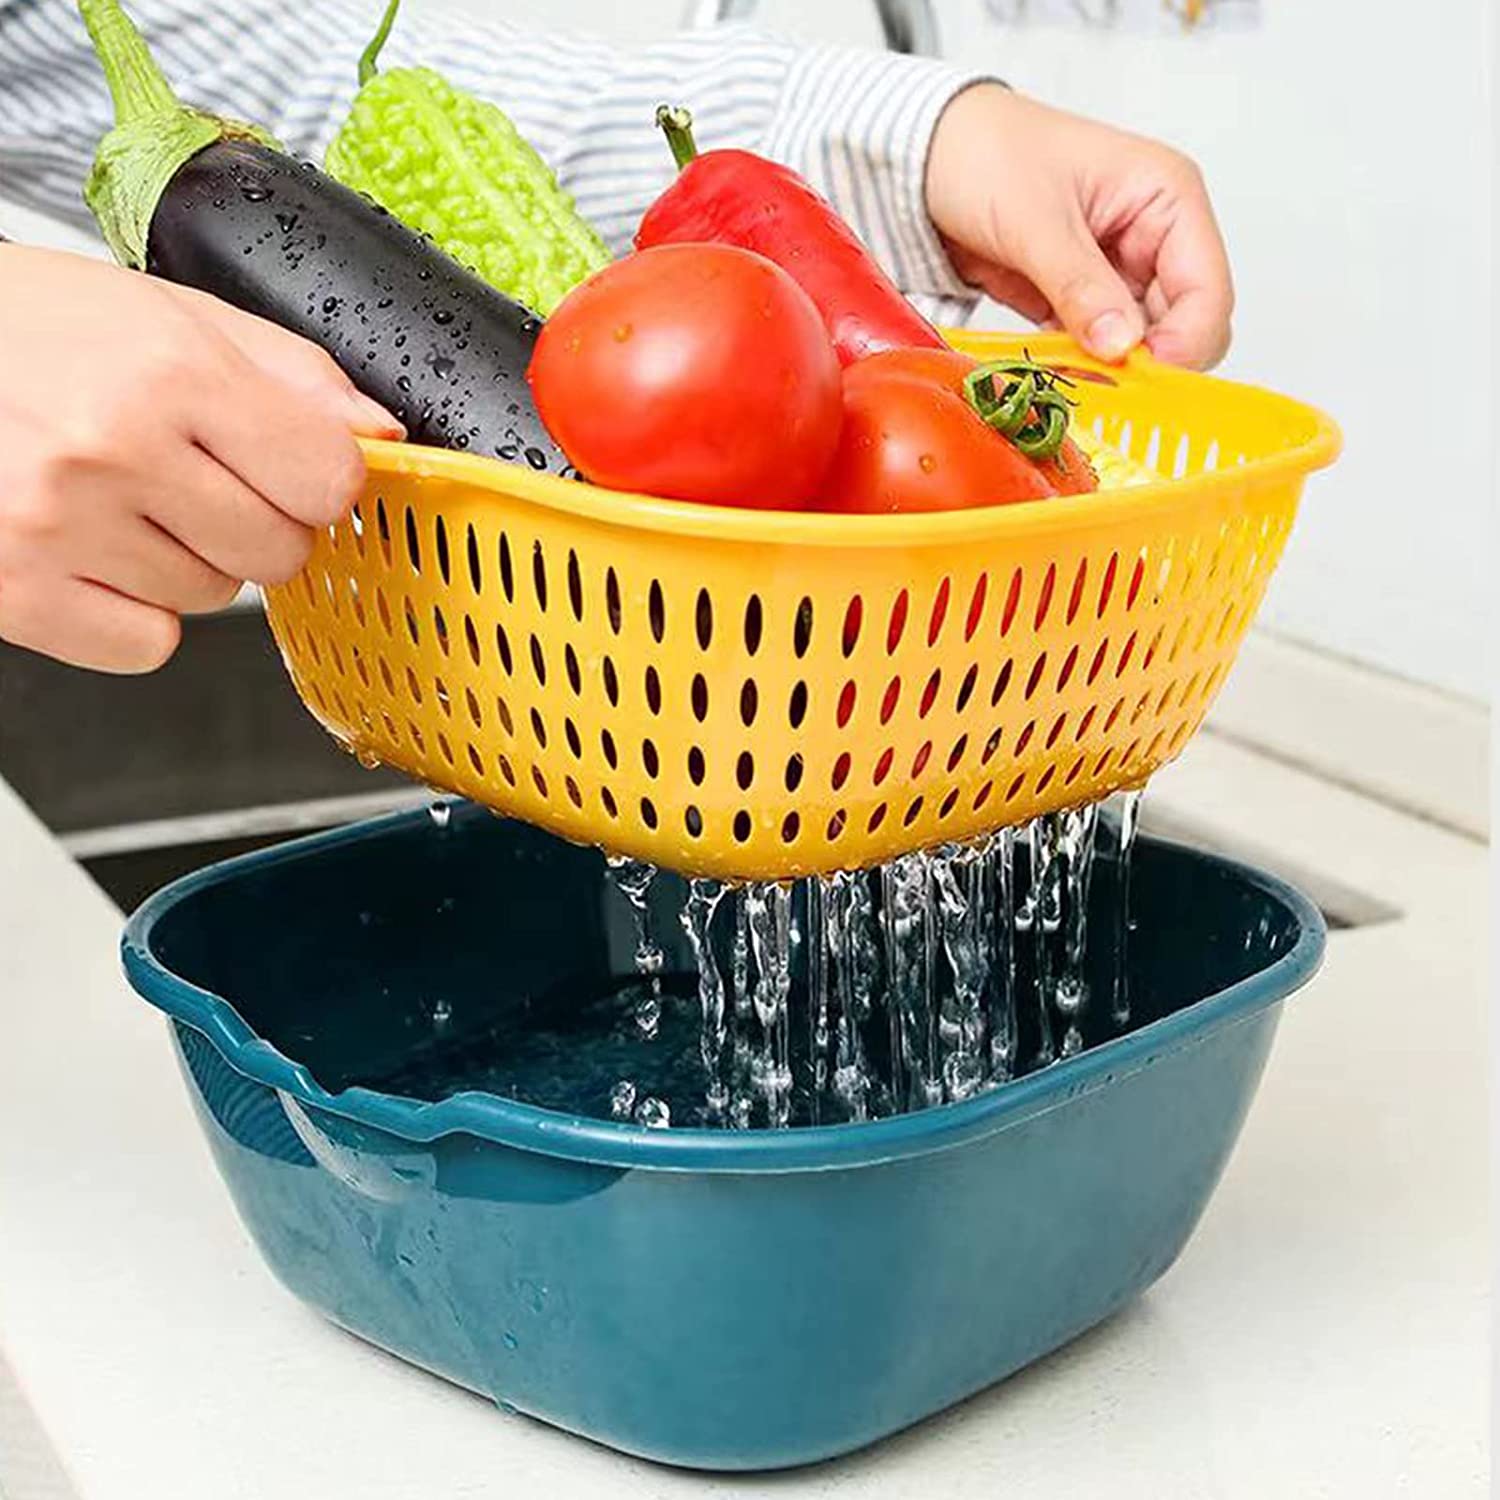  Fufafayo Six-Piece Kitchen Washbas in Double-Layer Basket  Vegetable and Fruit Multi-Functional Plastic Washing Basket Strainers for  Kitchen Strainer with Bowl My Orders Food Strainers (Blue) : Home & Kitchen